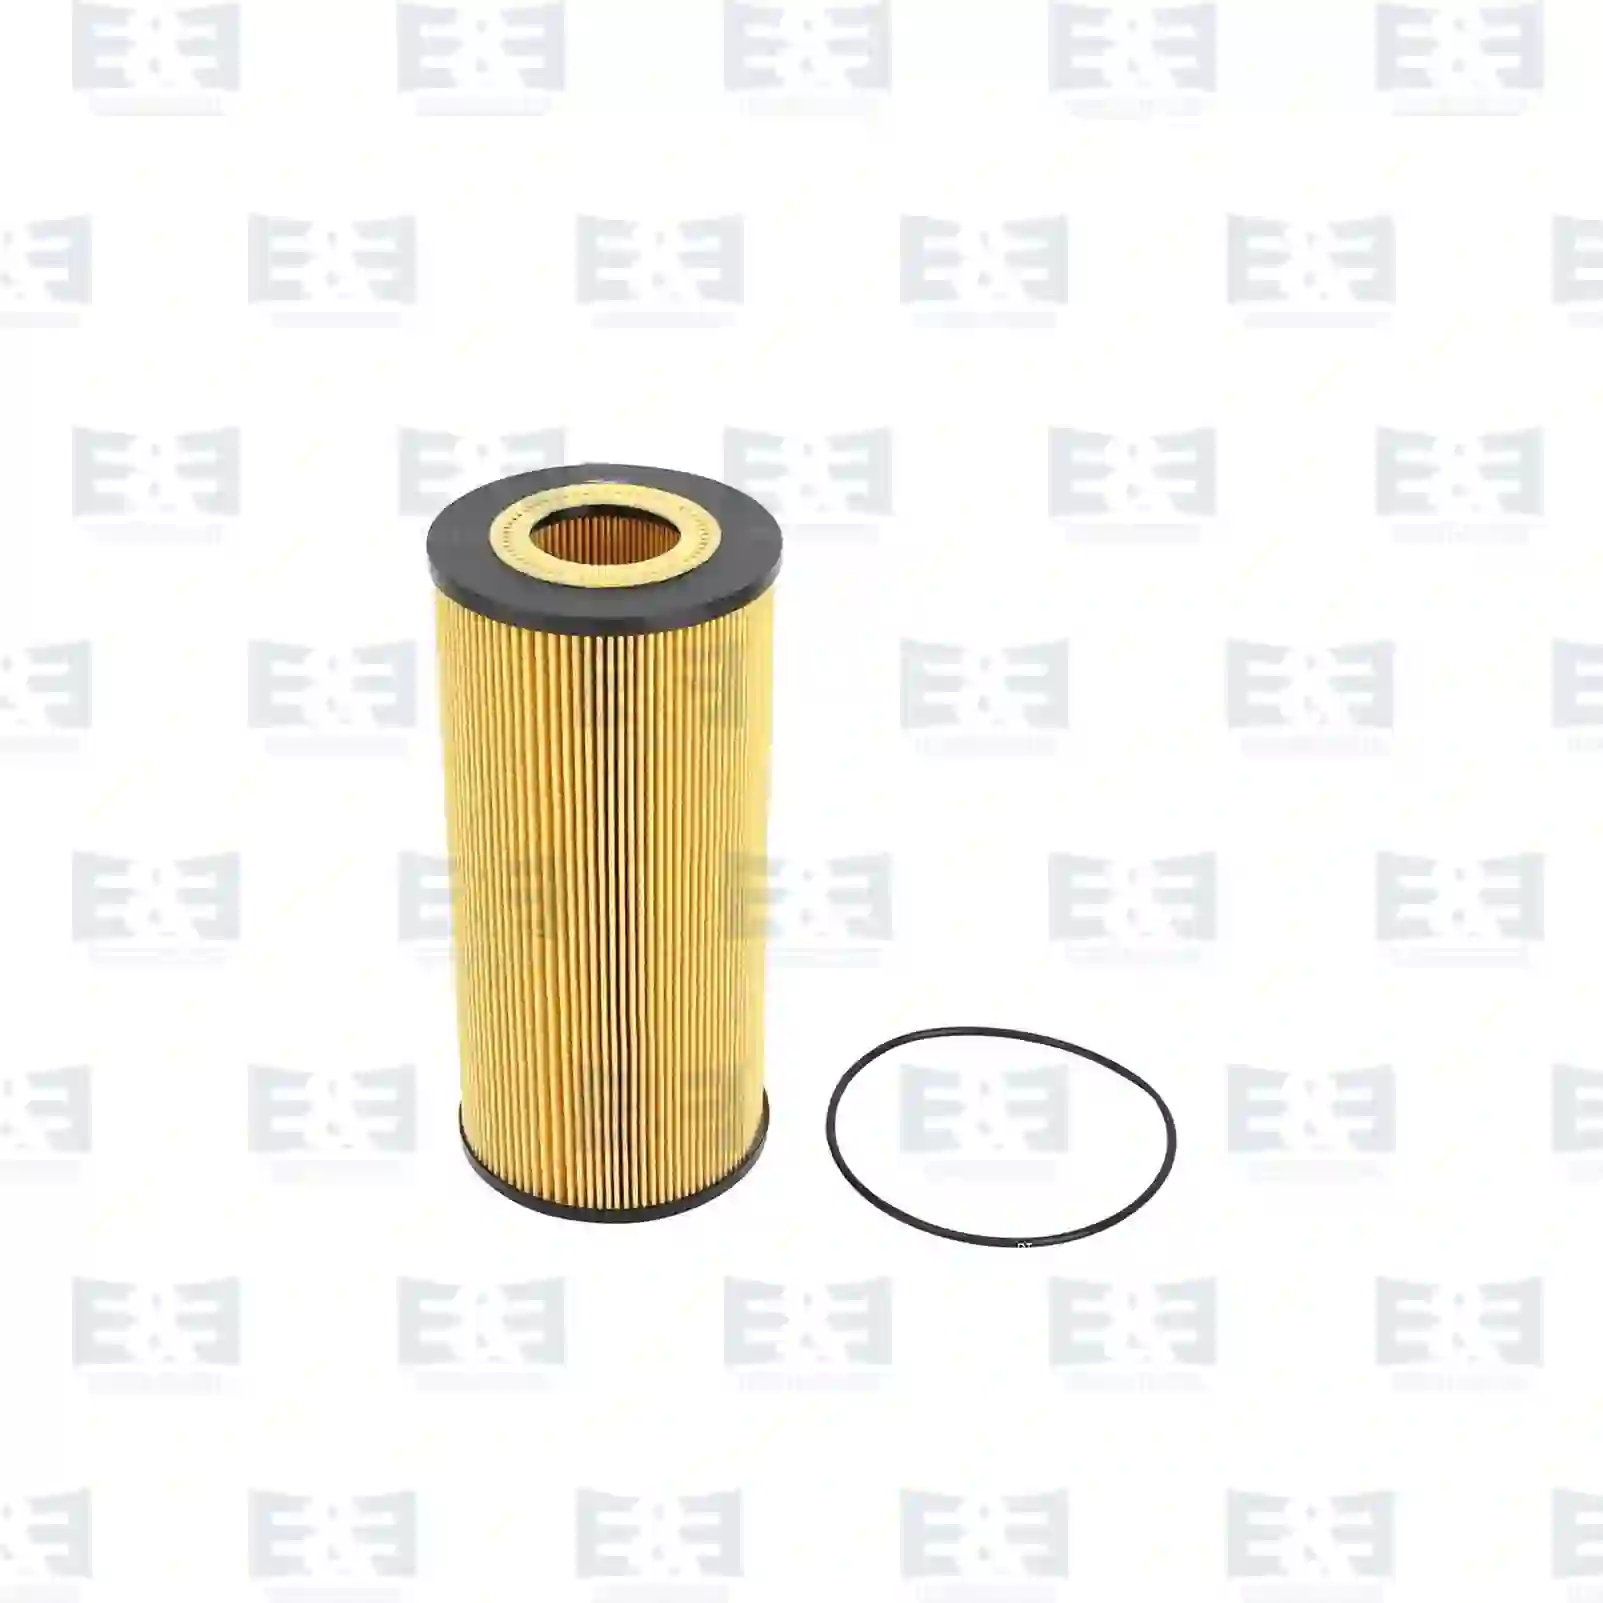 Oil Filter Oil filter insert, EE No 2E2200655 ,  oem no:0001420640, ABPN10GLF16046, 263J107001, 2191P550769, CH9558, 0001802109, 0001802909, 4571840125, 6861800209, 83120970180, 85114072, ZG01740-0008 E&E Truck Spare Parts | Truck Spare Parts, Auotomotive Spare Parts